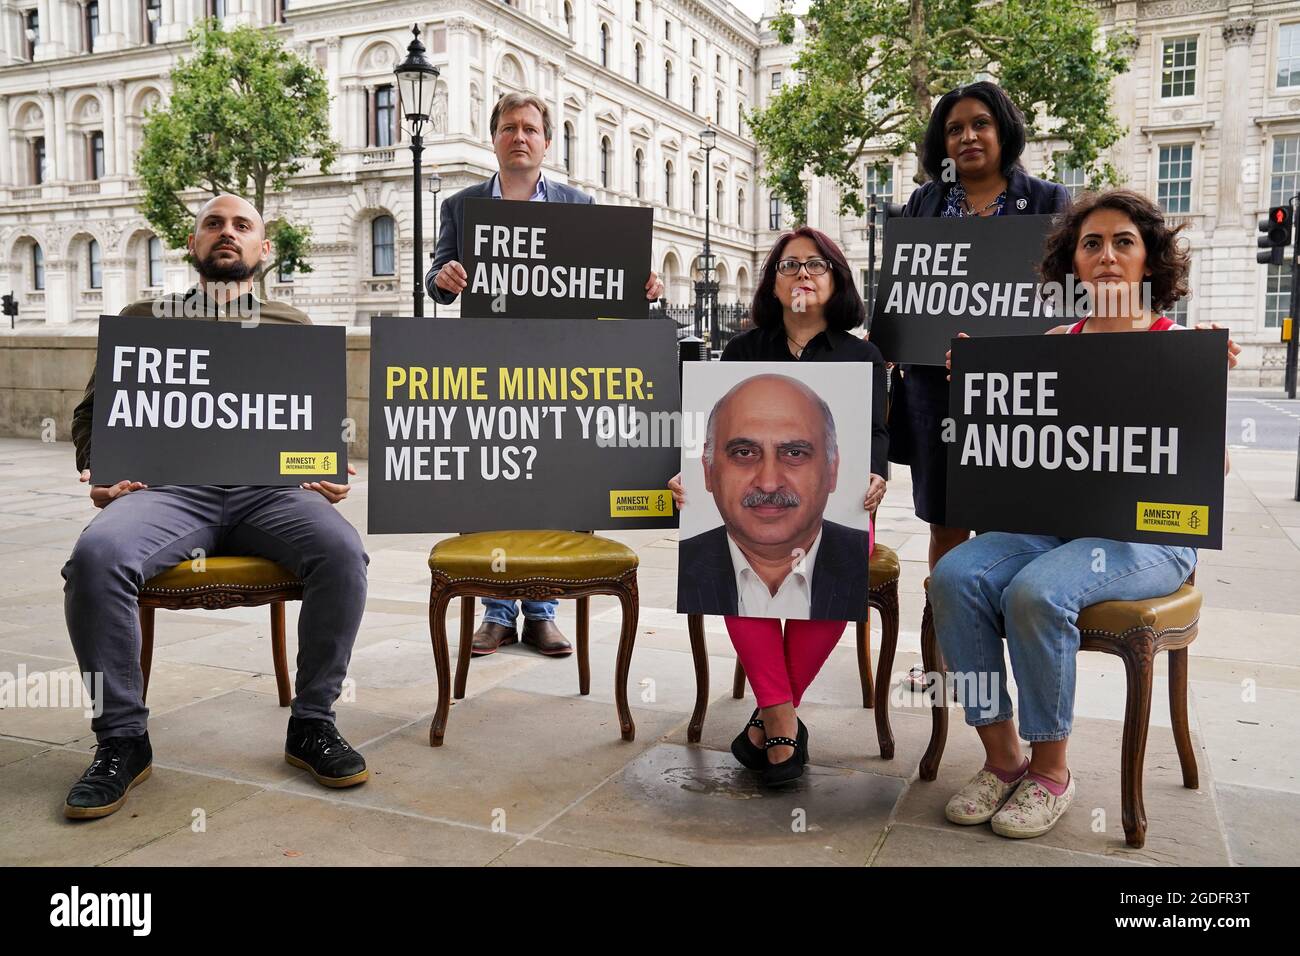 (Left to right) Aryan Ashoori, the son of Anoosheh Ashoori, Richard Ratcliffe, Sherry Izadi, the wife of Anoosheh Ashoori, MP for Lewisham East Janet Daby and Elika Ashoori, the daughter of Anoosheh Ashoori, a British man who has been jailed in Iran, stage an 'empty chair' protest opposite Downing Street, London, marking the 4th anniversary of his imprisonment. Picture date: Friday August 13, 2021. Stock Photo